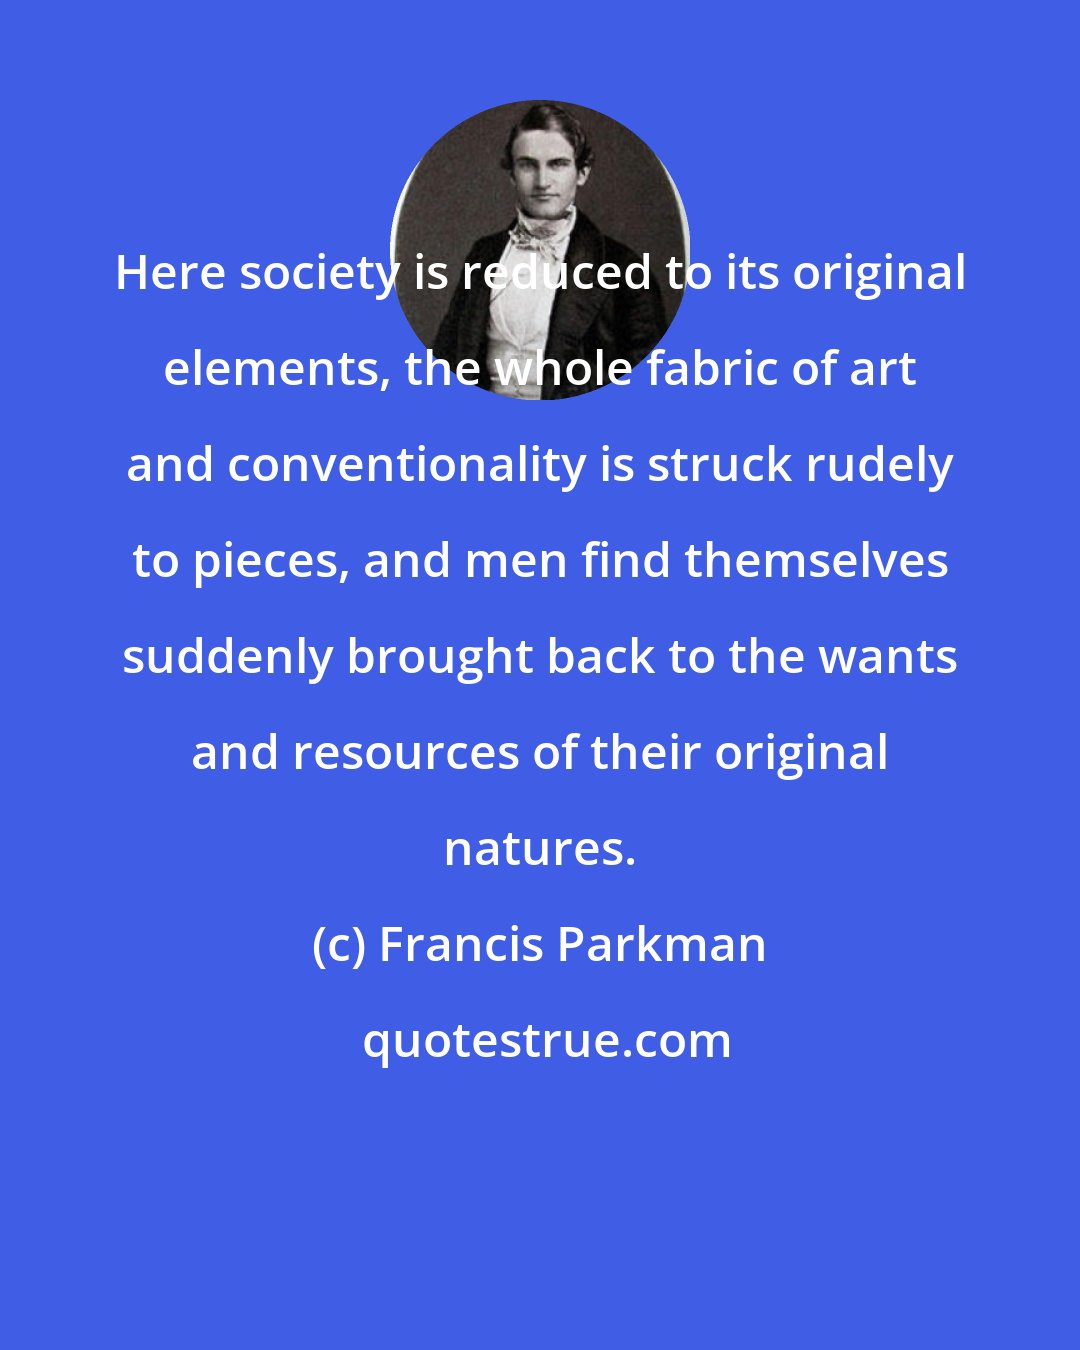 Francis Parkman: Here society is reduced to its original elements, the whole fabric of art and conventionality is struck rudely to pieces, and men find themselves suddenly brought back to the wants and resources of their original natures.